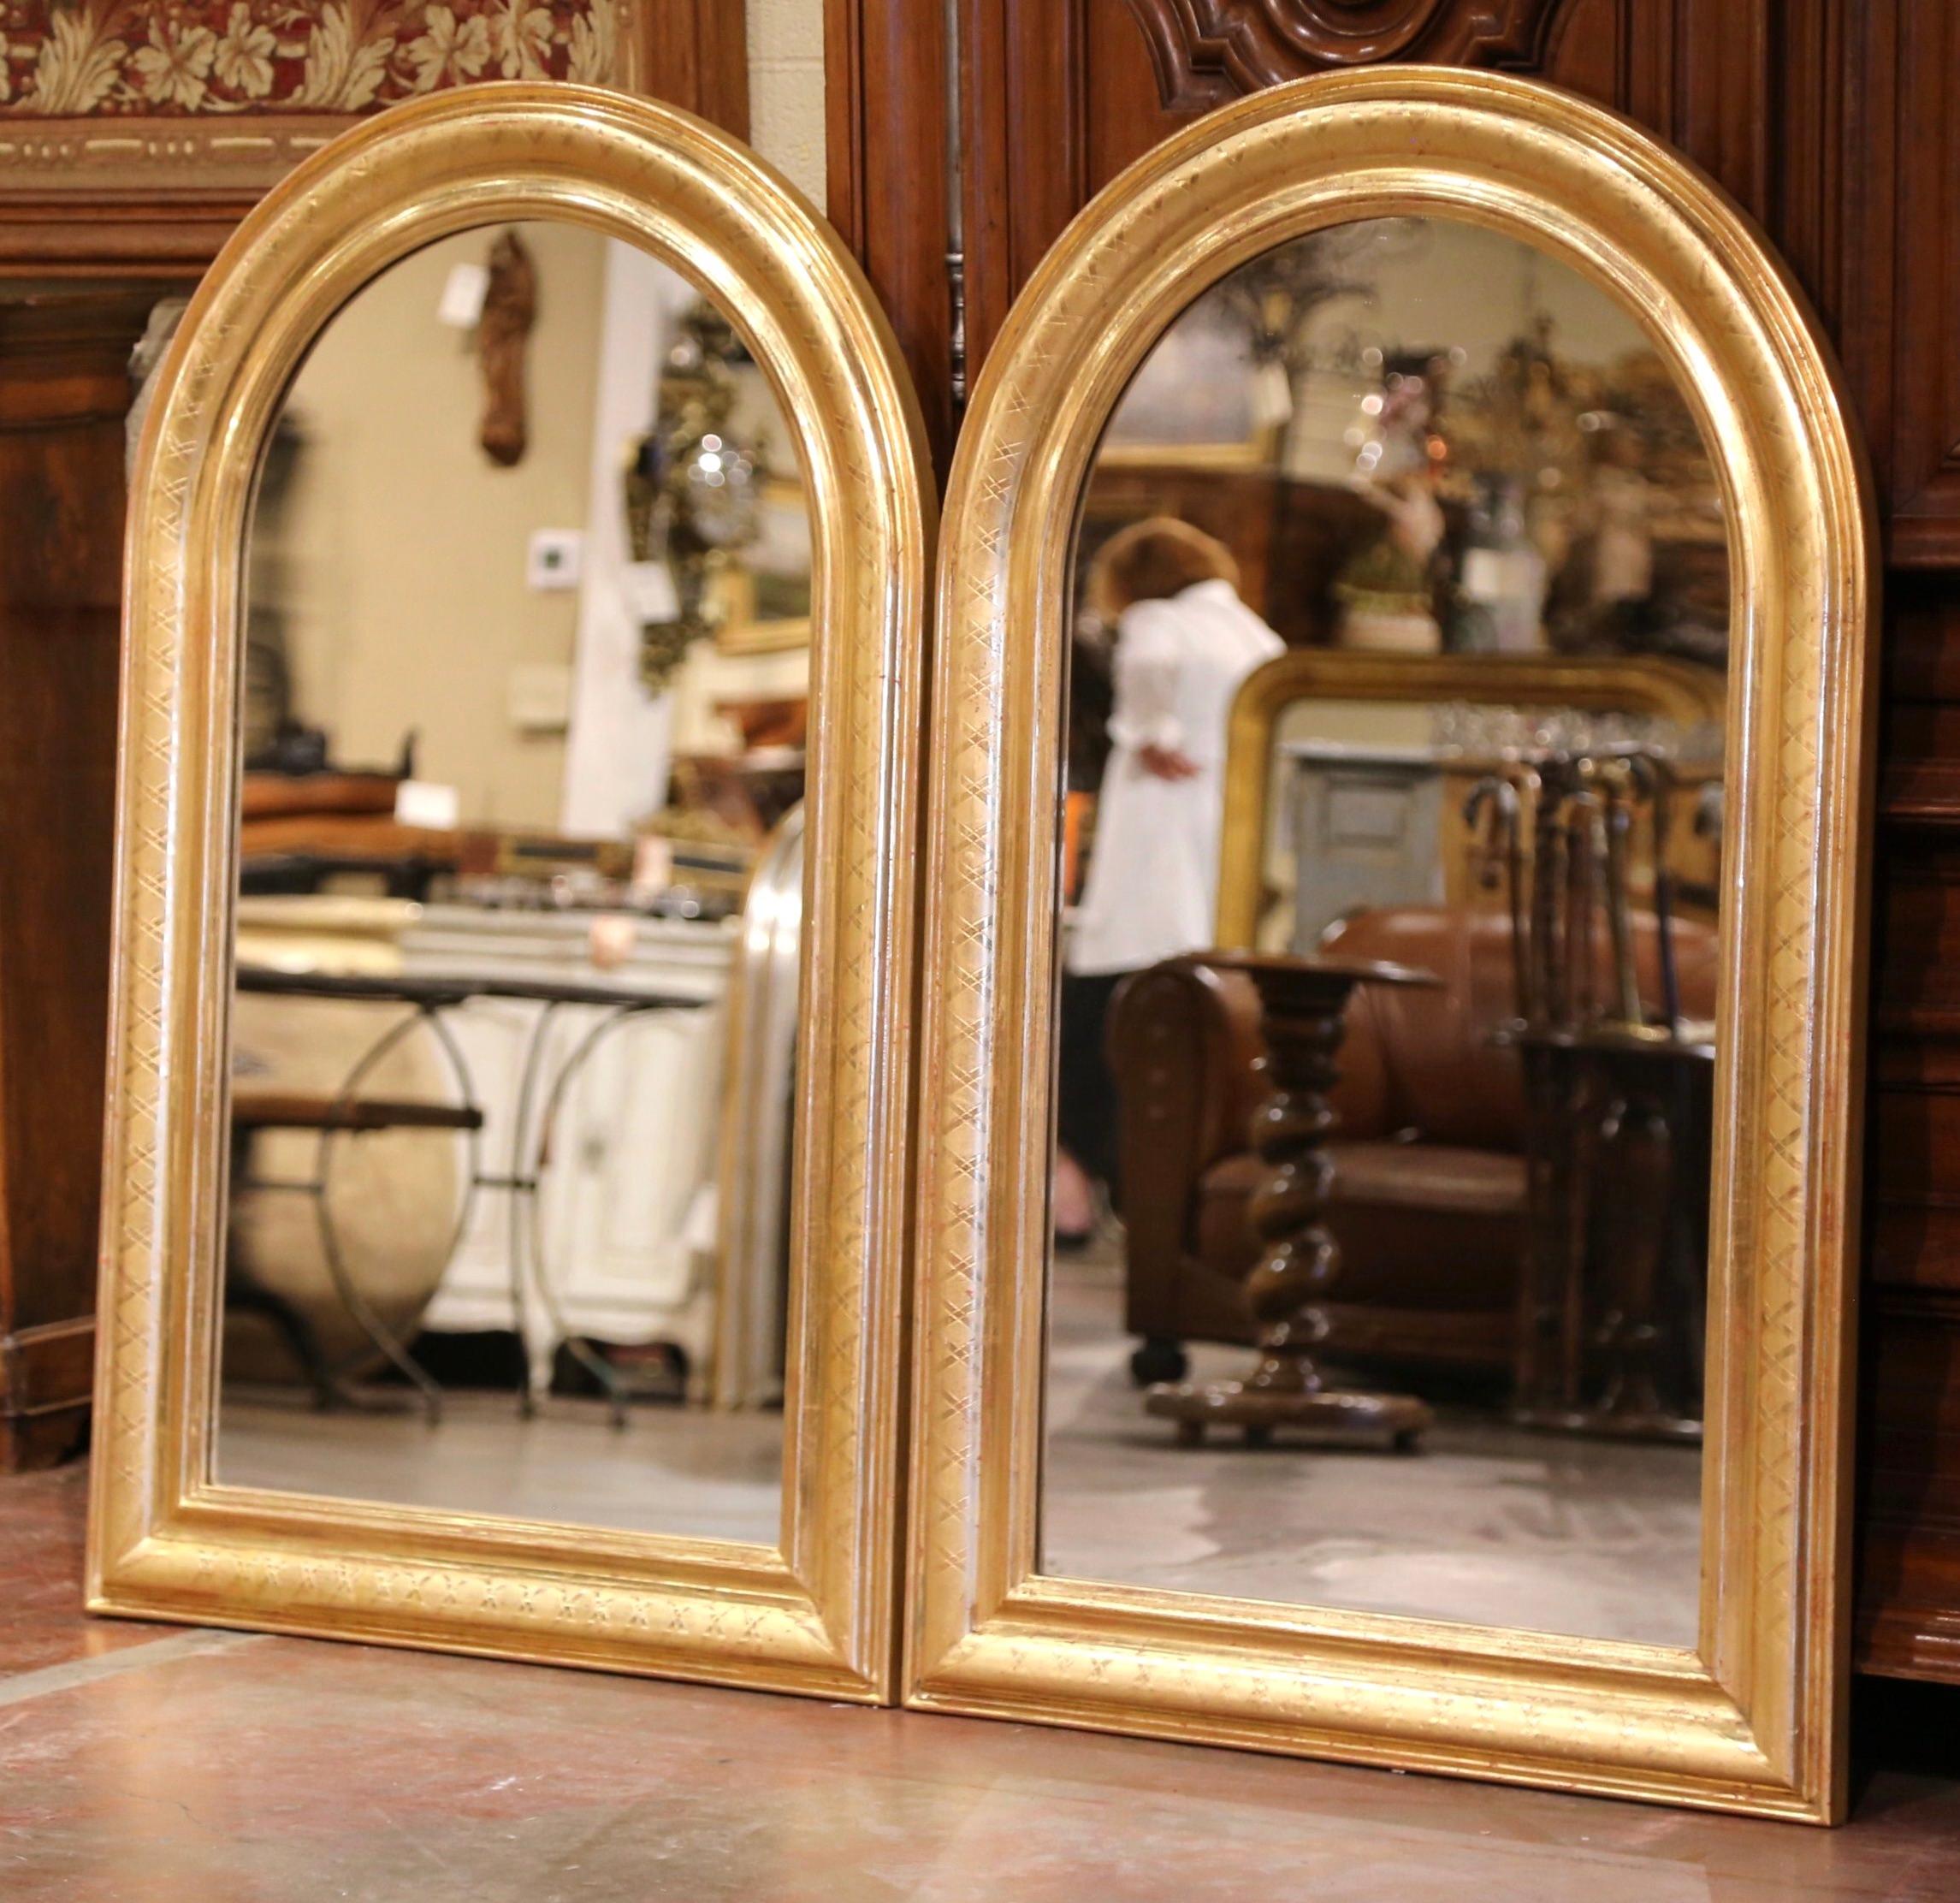 Decorate a master bathroom with this elegant pair of wall mirrors! Crafted in France, circa 1970, each antique mirror has traditional, timeless lines with an elegant arched top. The frame is decorated with a luxurious gold leaf finish over discrete